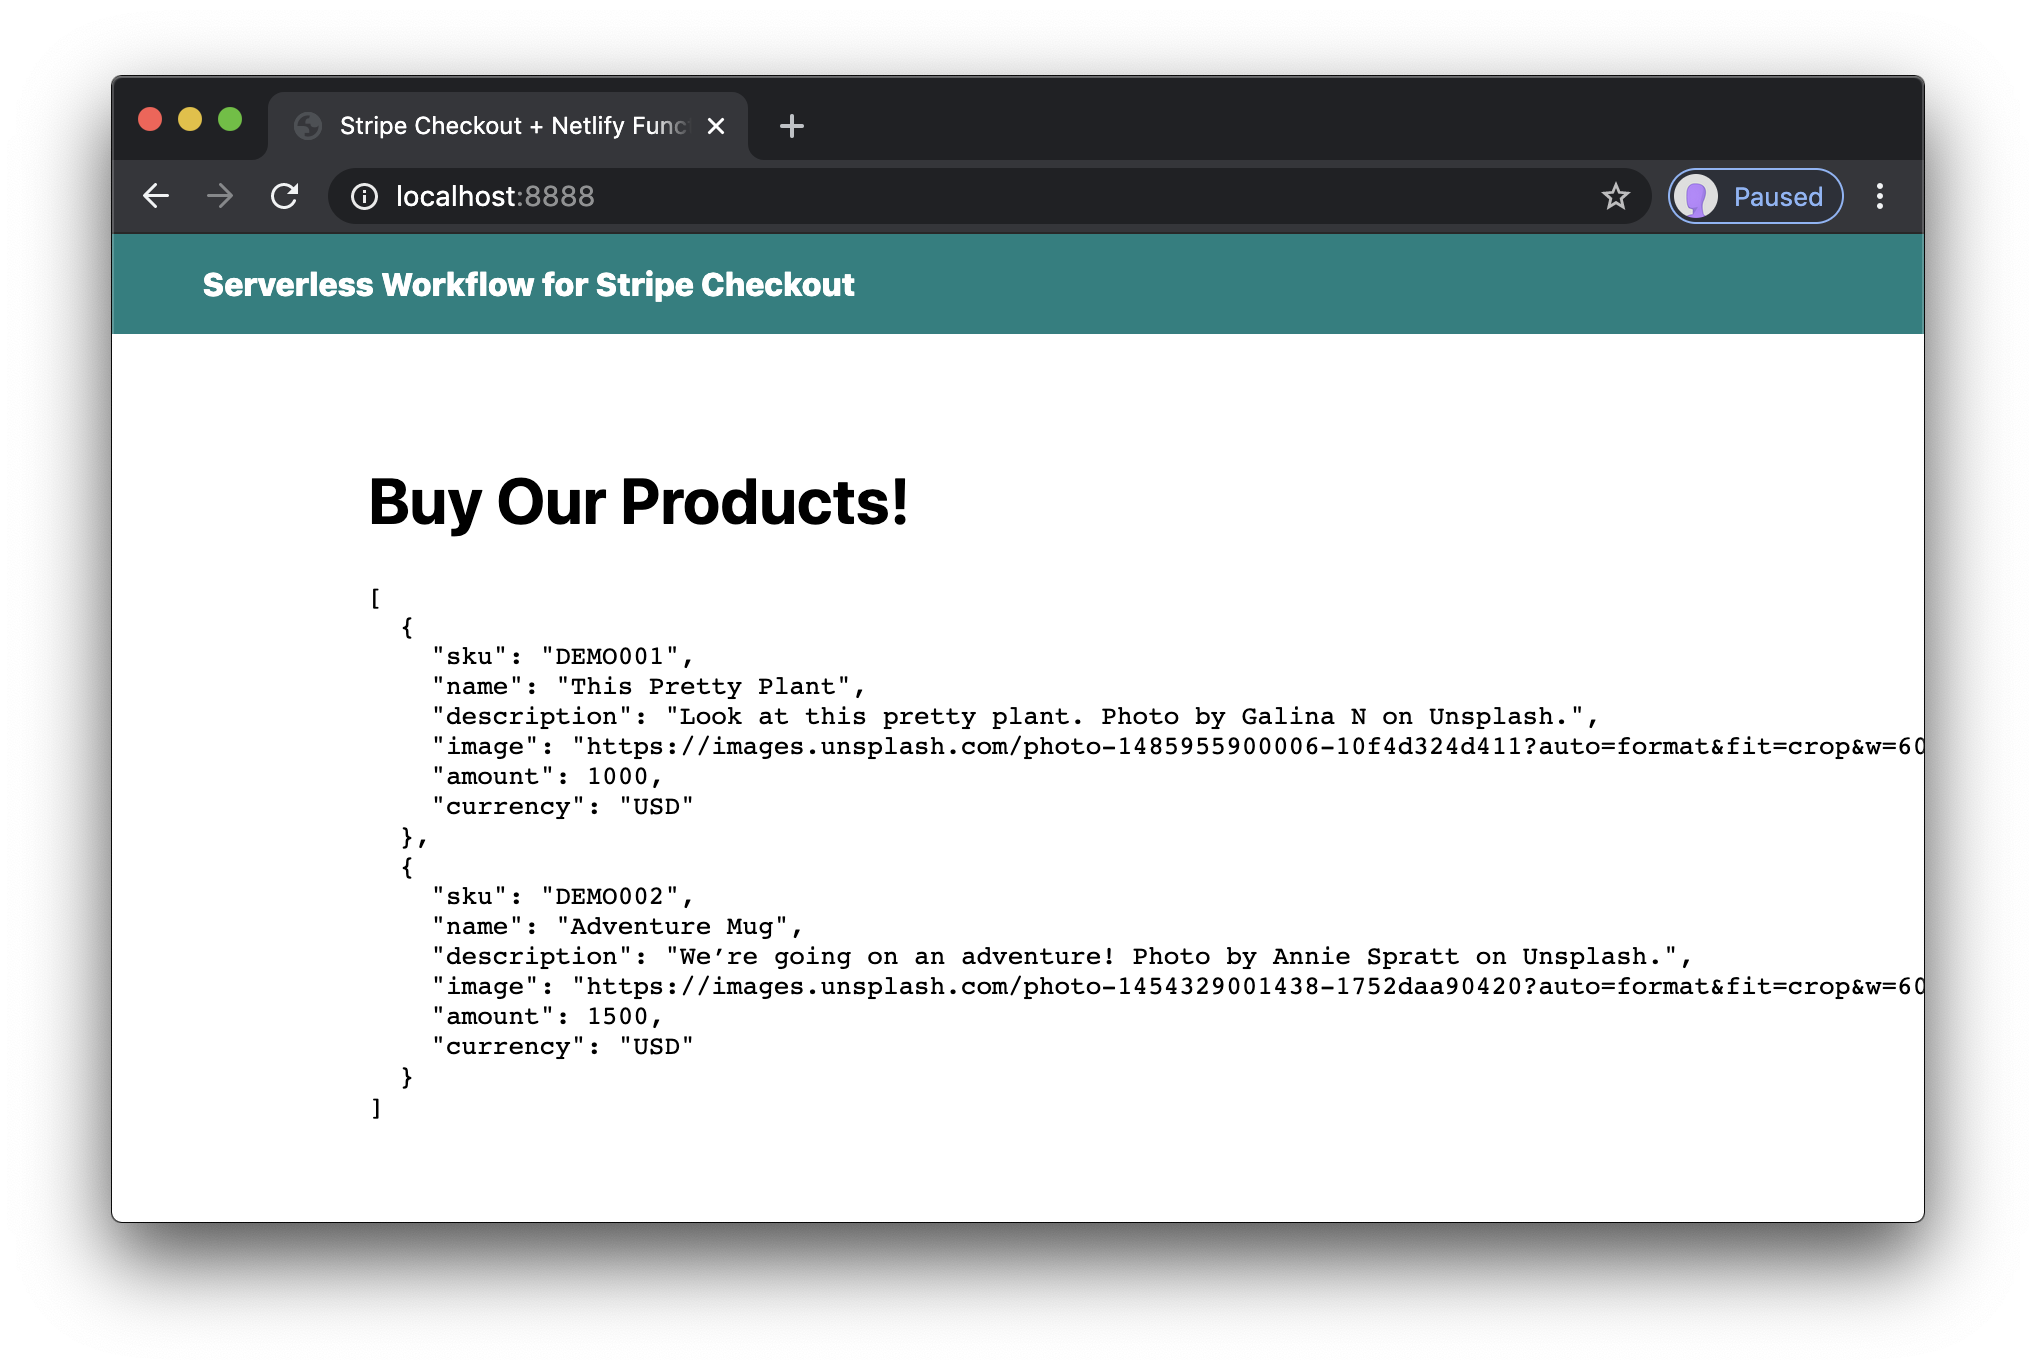 product JSON displayed on the page